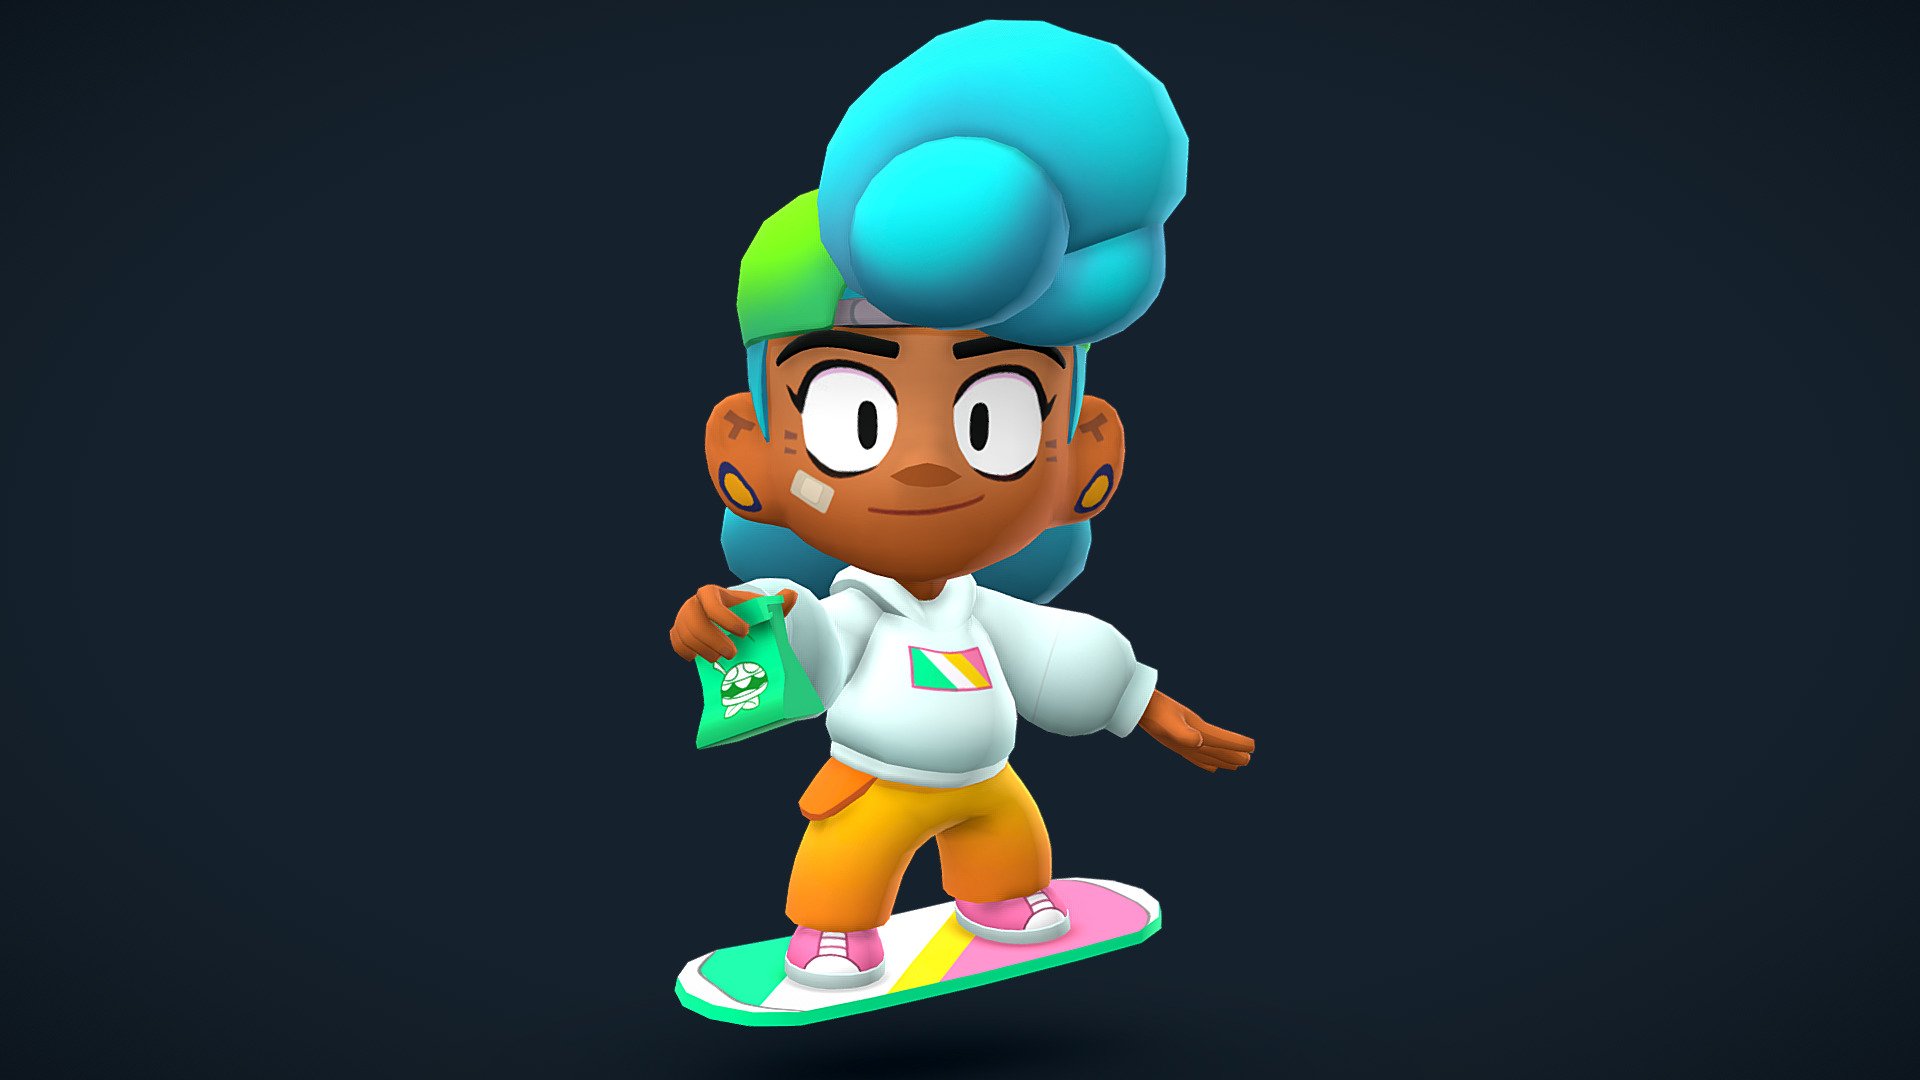 I made this lovely character based on a concept of Vincent Venoir. I tried to match this character as good as possible with the existing 3D characters in Brawl Stars 3d model